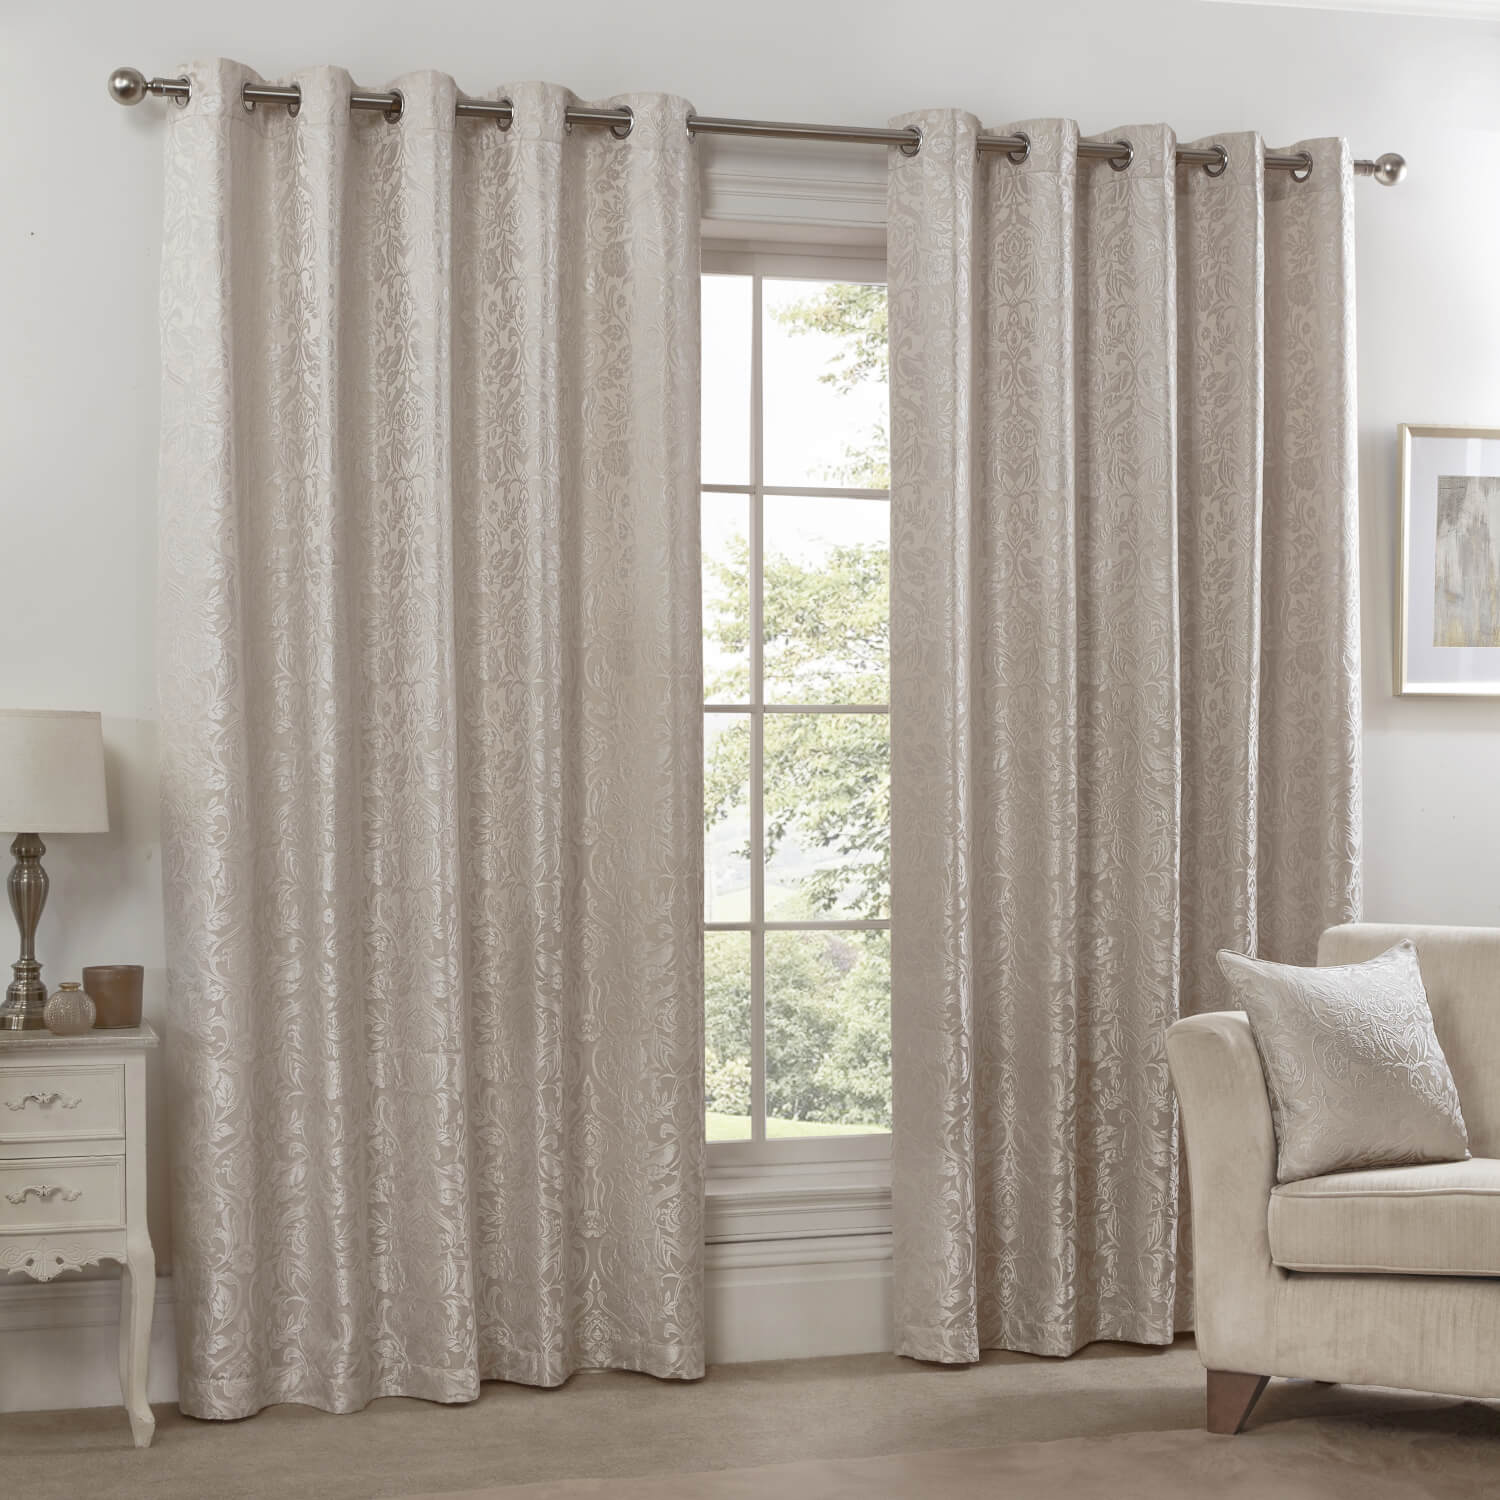 Maison By Emma Barclay Lined Eyelet Jacquard Curtains - Cream 1 Shaws Department Stores